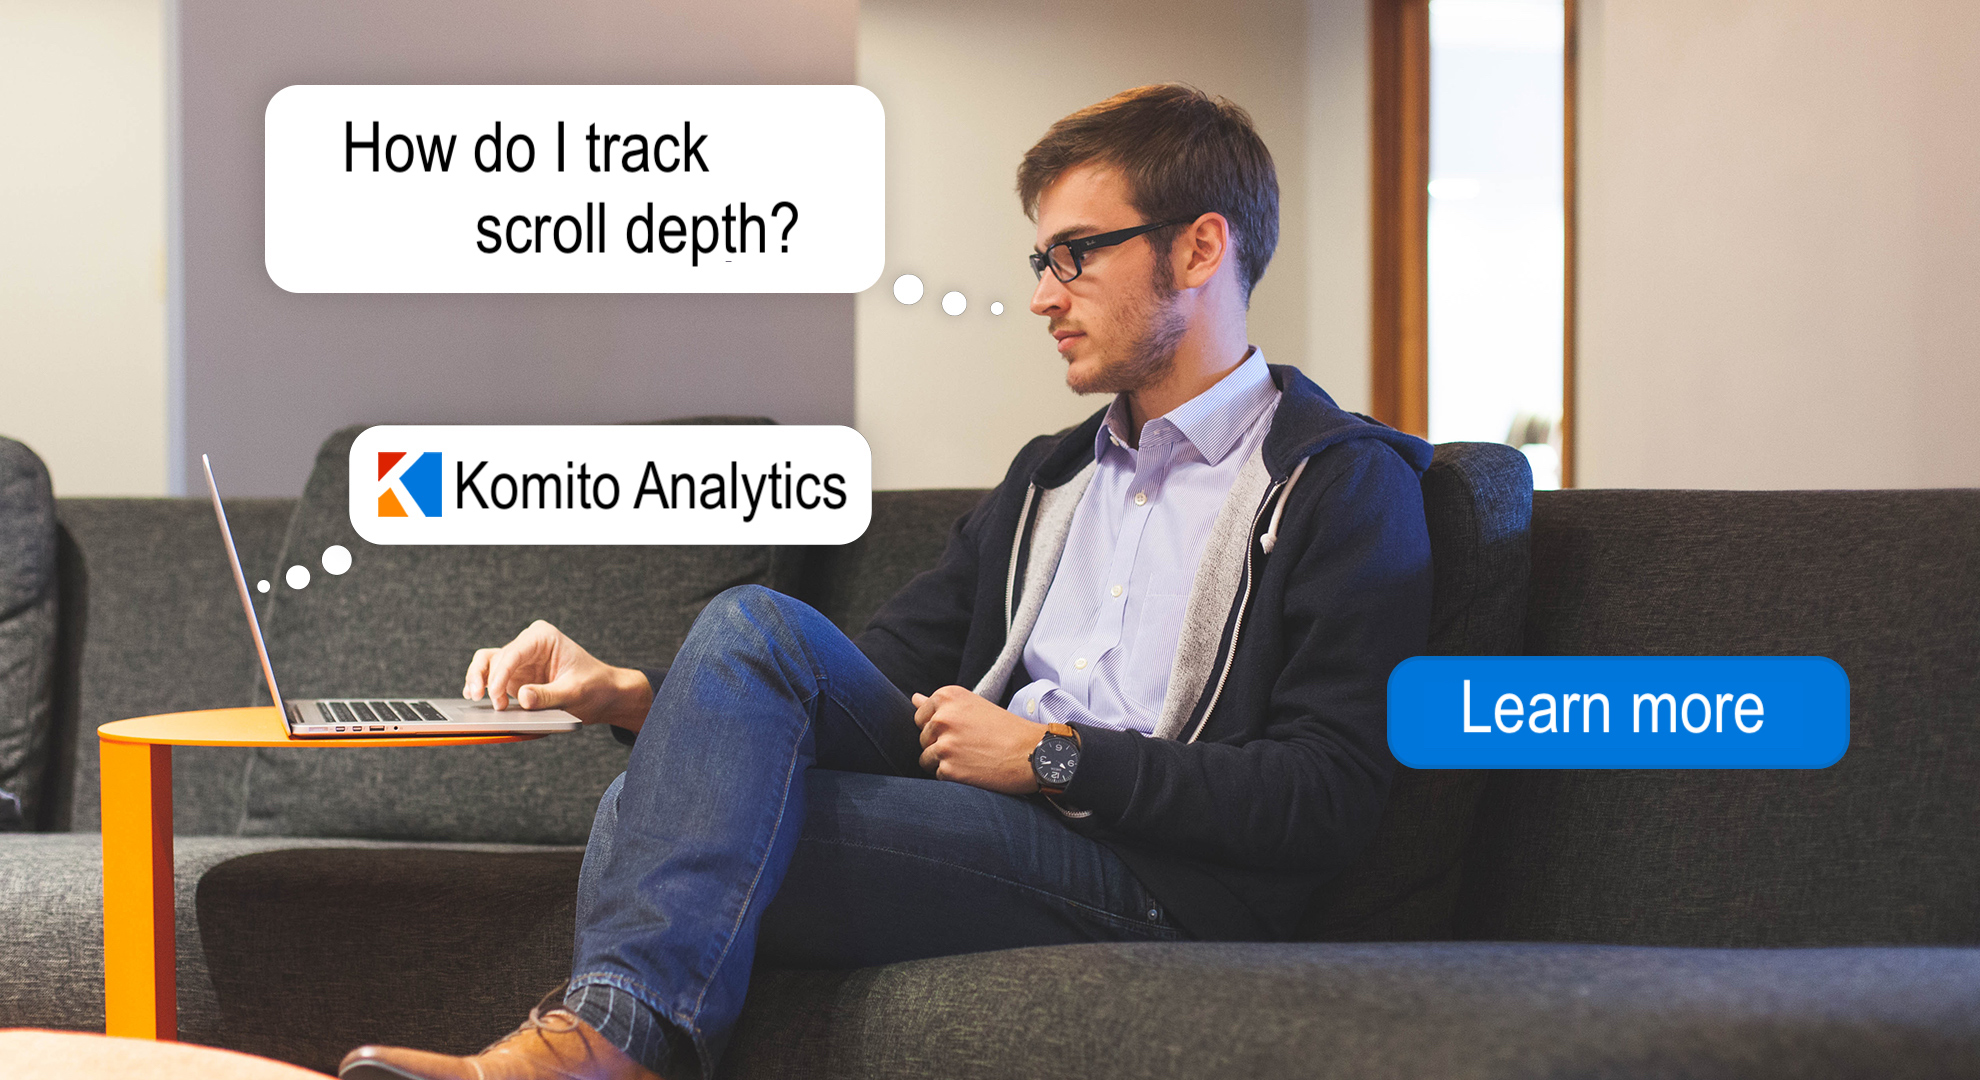 How to track scroll depth with Komito Analytics?